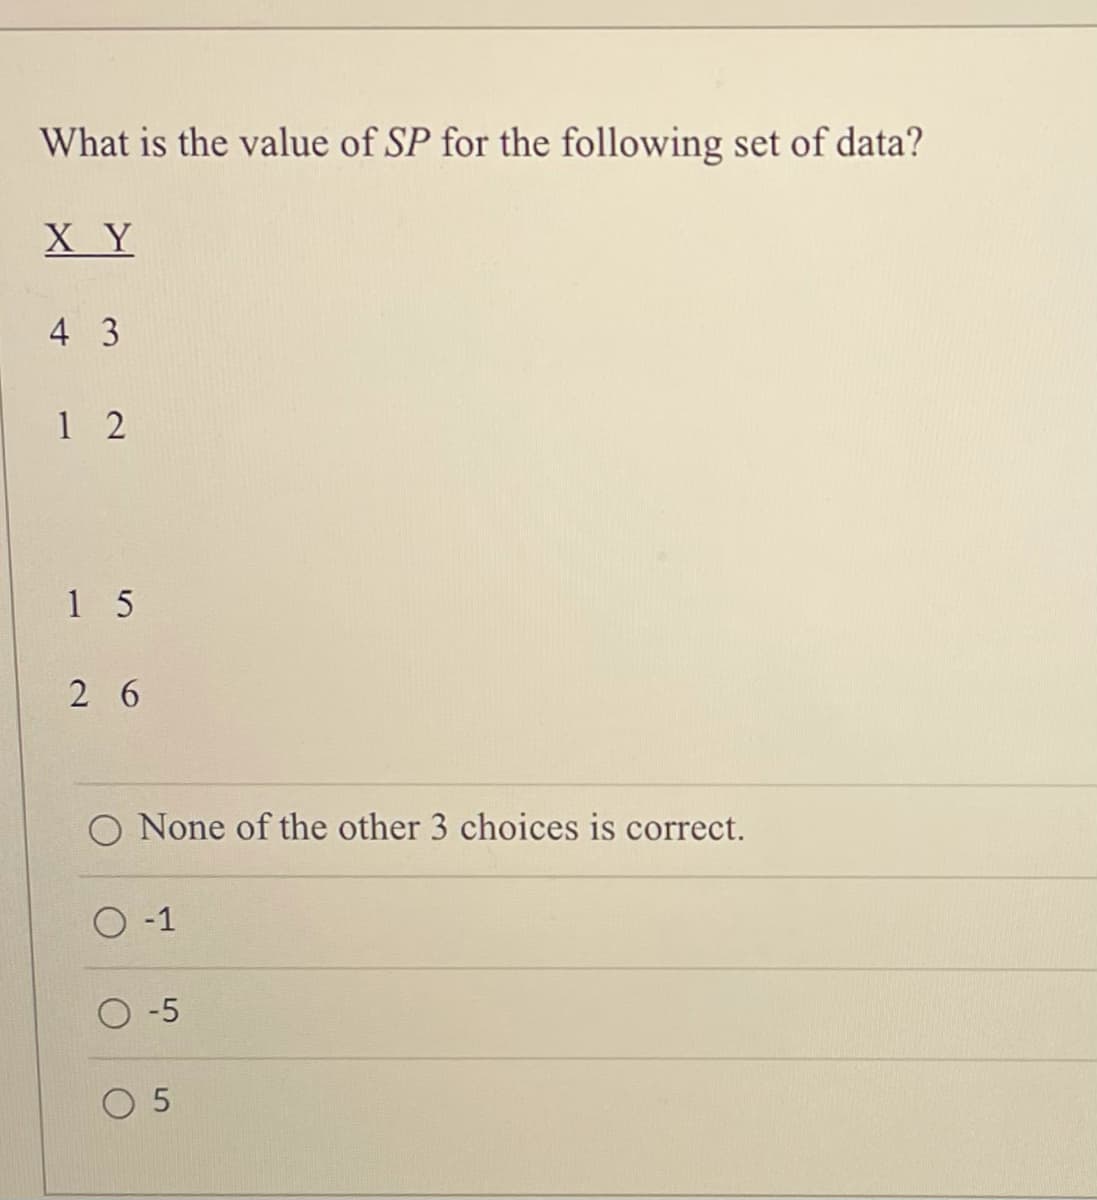 What is the value of SP for the following set of data?
XY
4 3
1 2
1 5
2 6
O None of the other 3 choices is correct.
O -1
O -5
